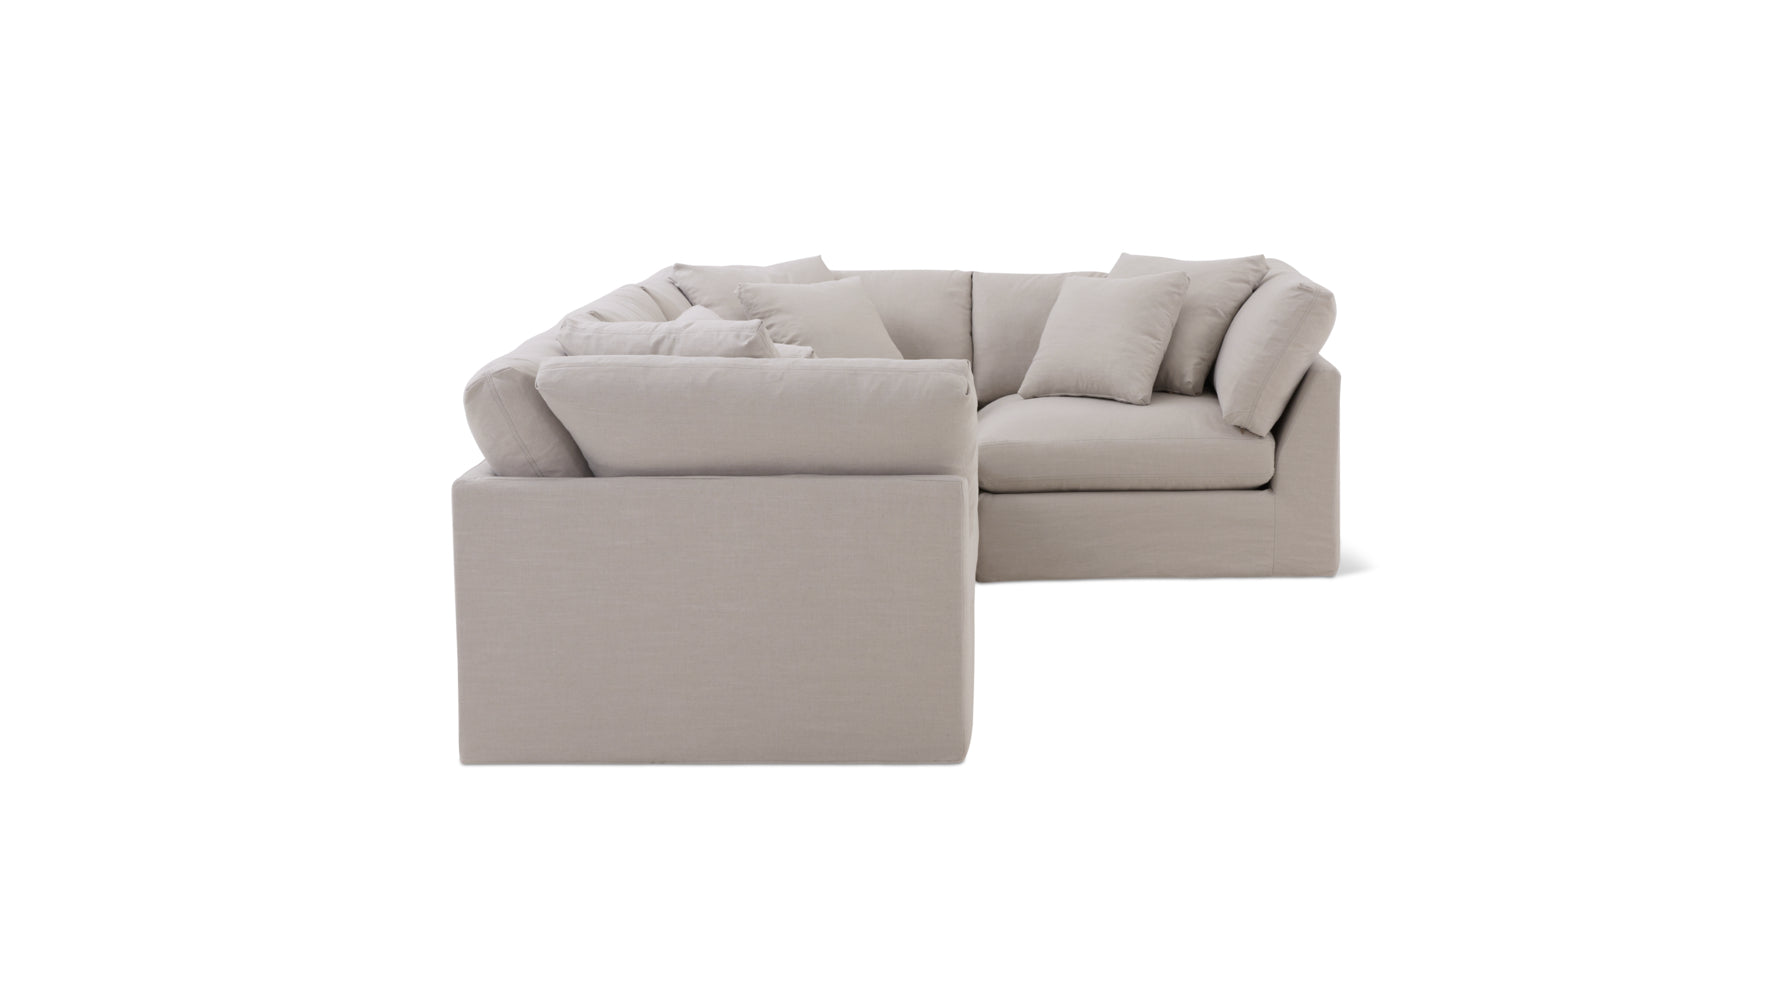 Get Together™ 4-Piece Modular Sectional Closed, Large, Clay - Image 5